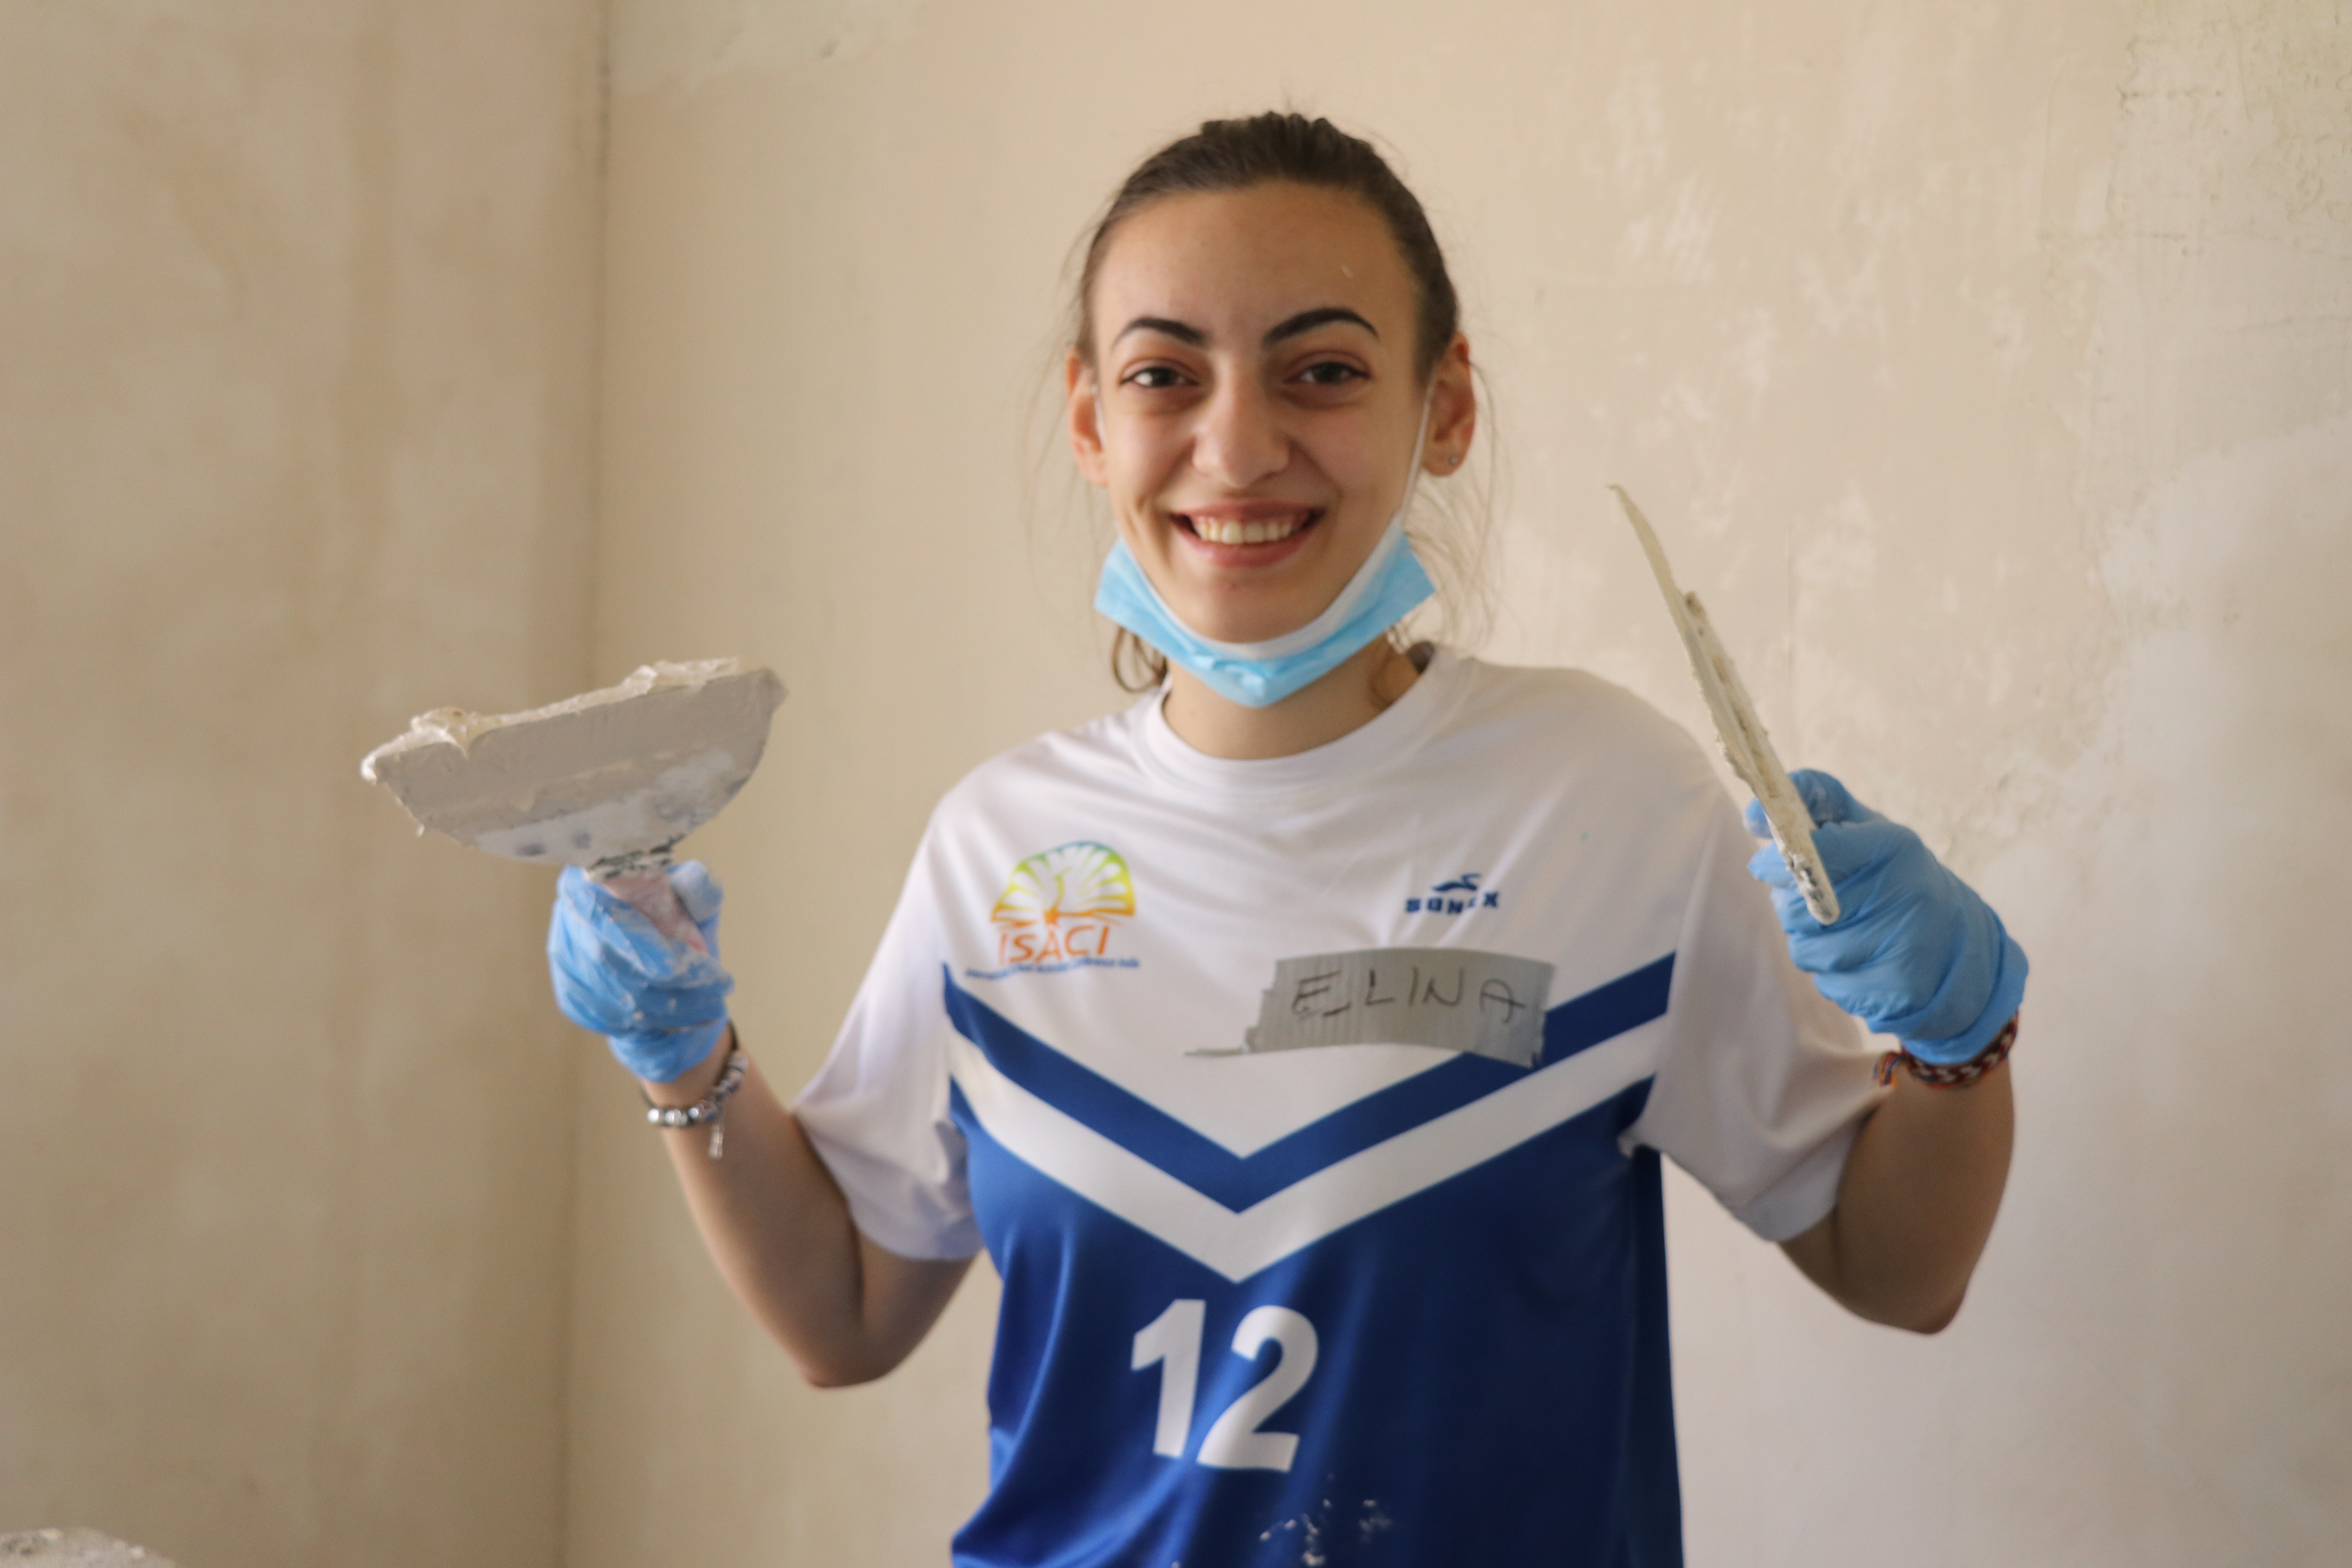 UWC Dilijan College Students Helping Build a Home  for a Family in Need with Fuller Center for Housing Armenia